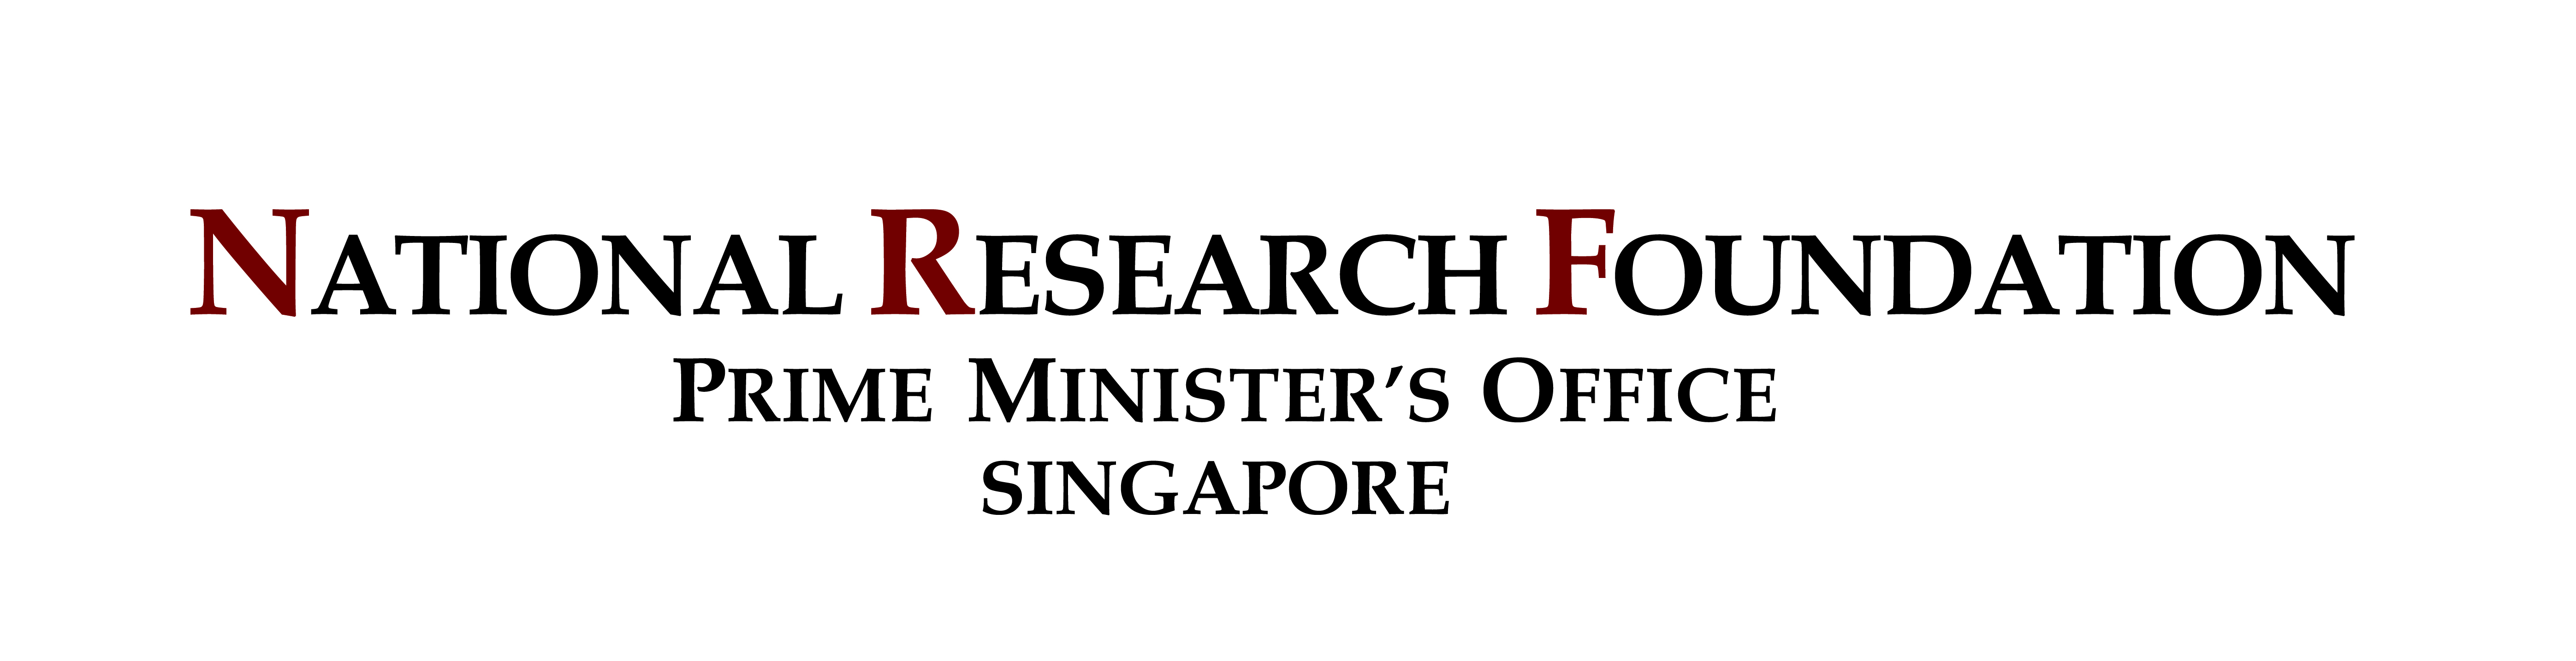 National Research Foundation (Logo)